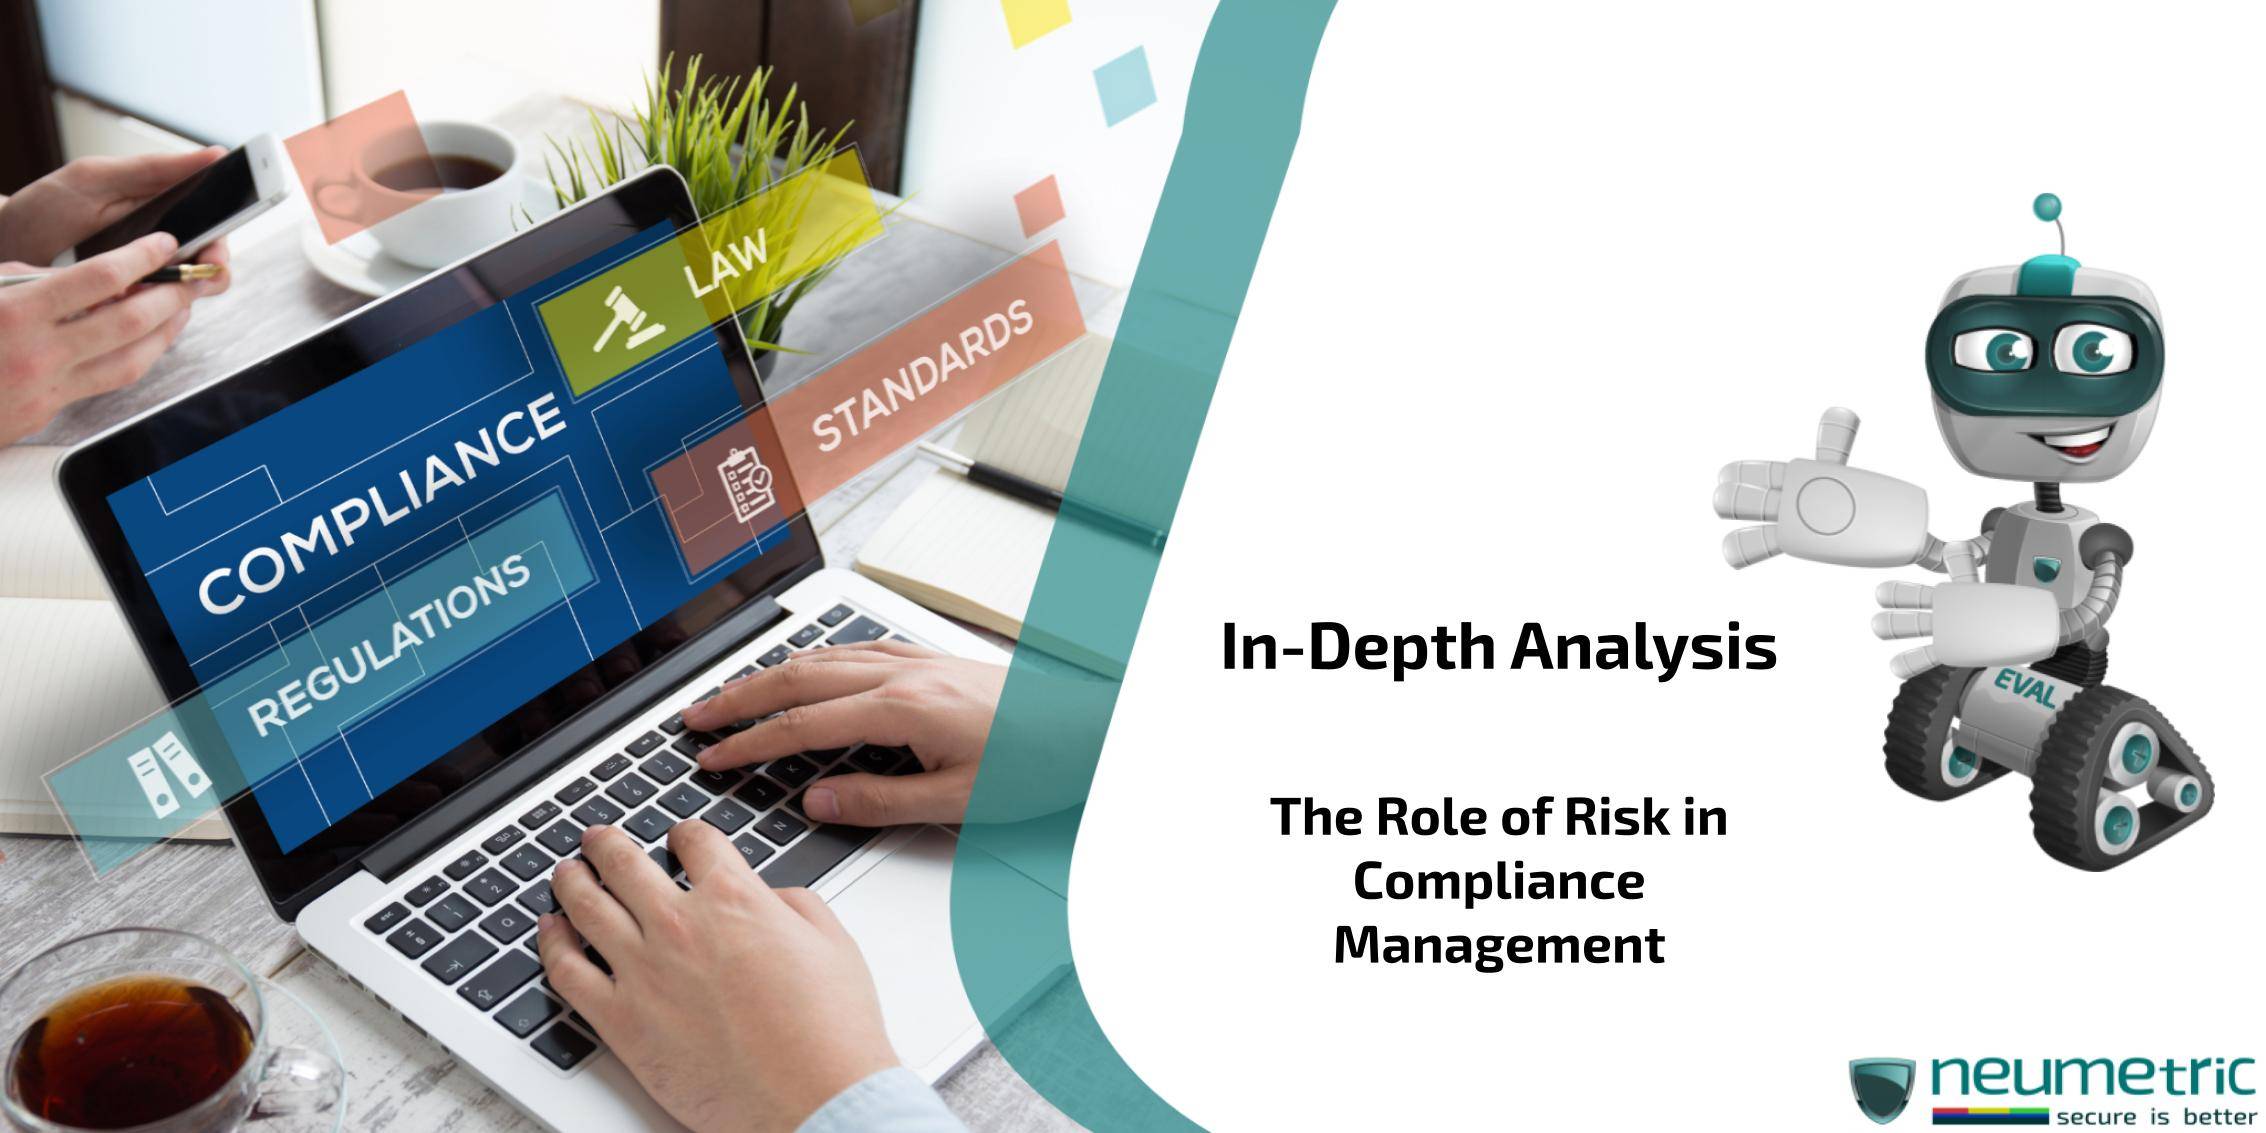 In-Depth Analysis: The Role of Risk in Compliance Management